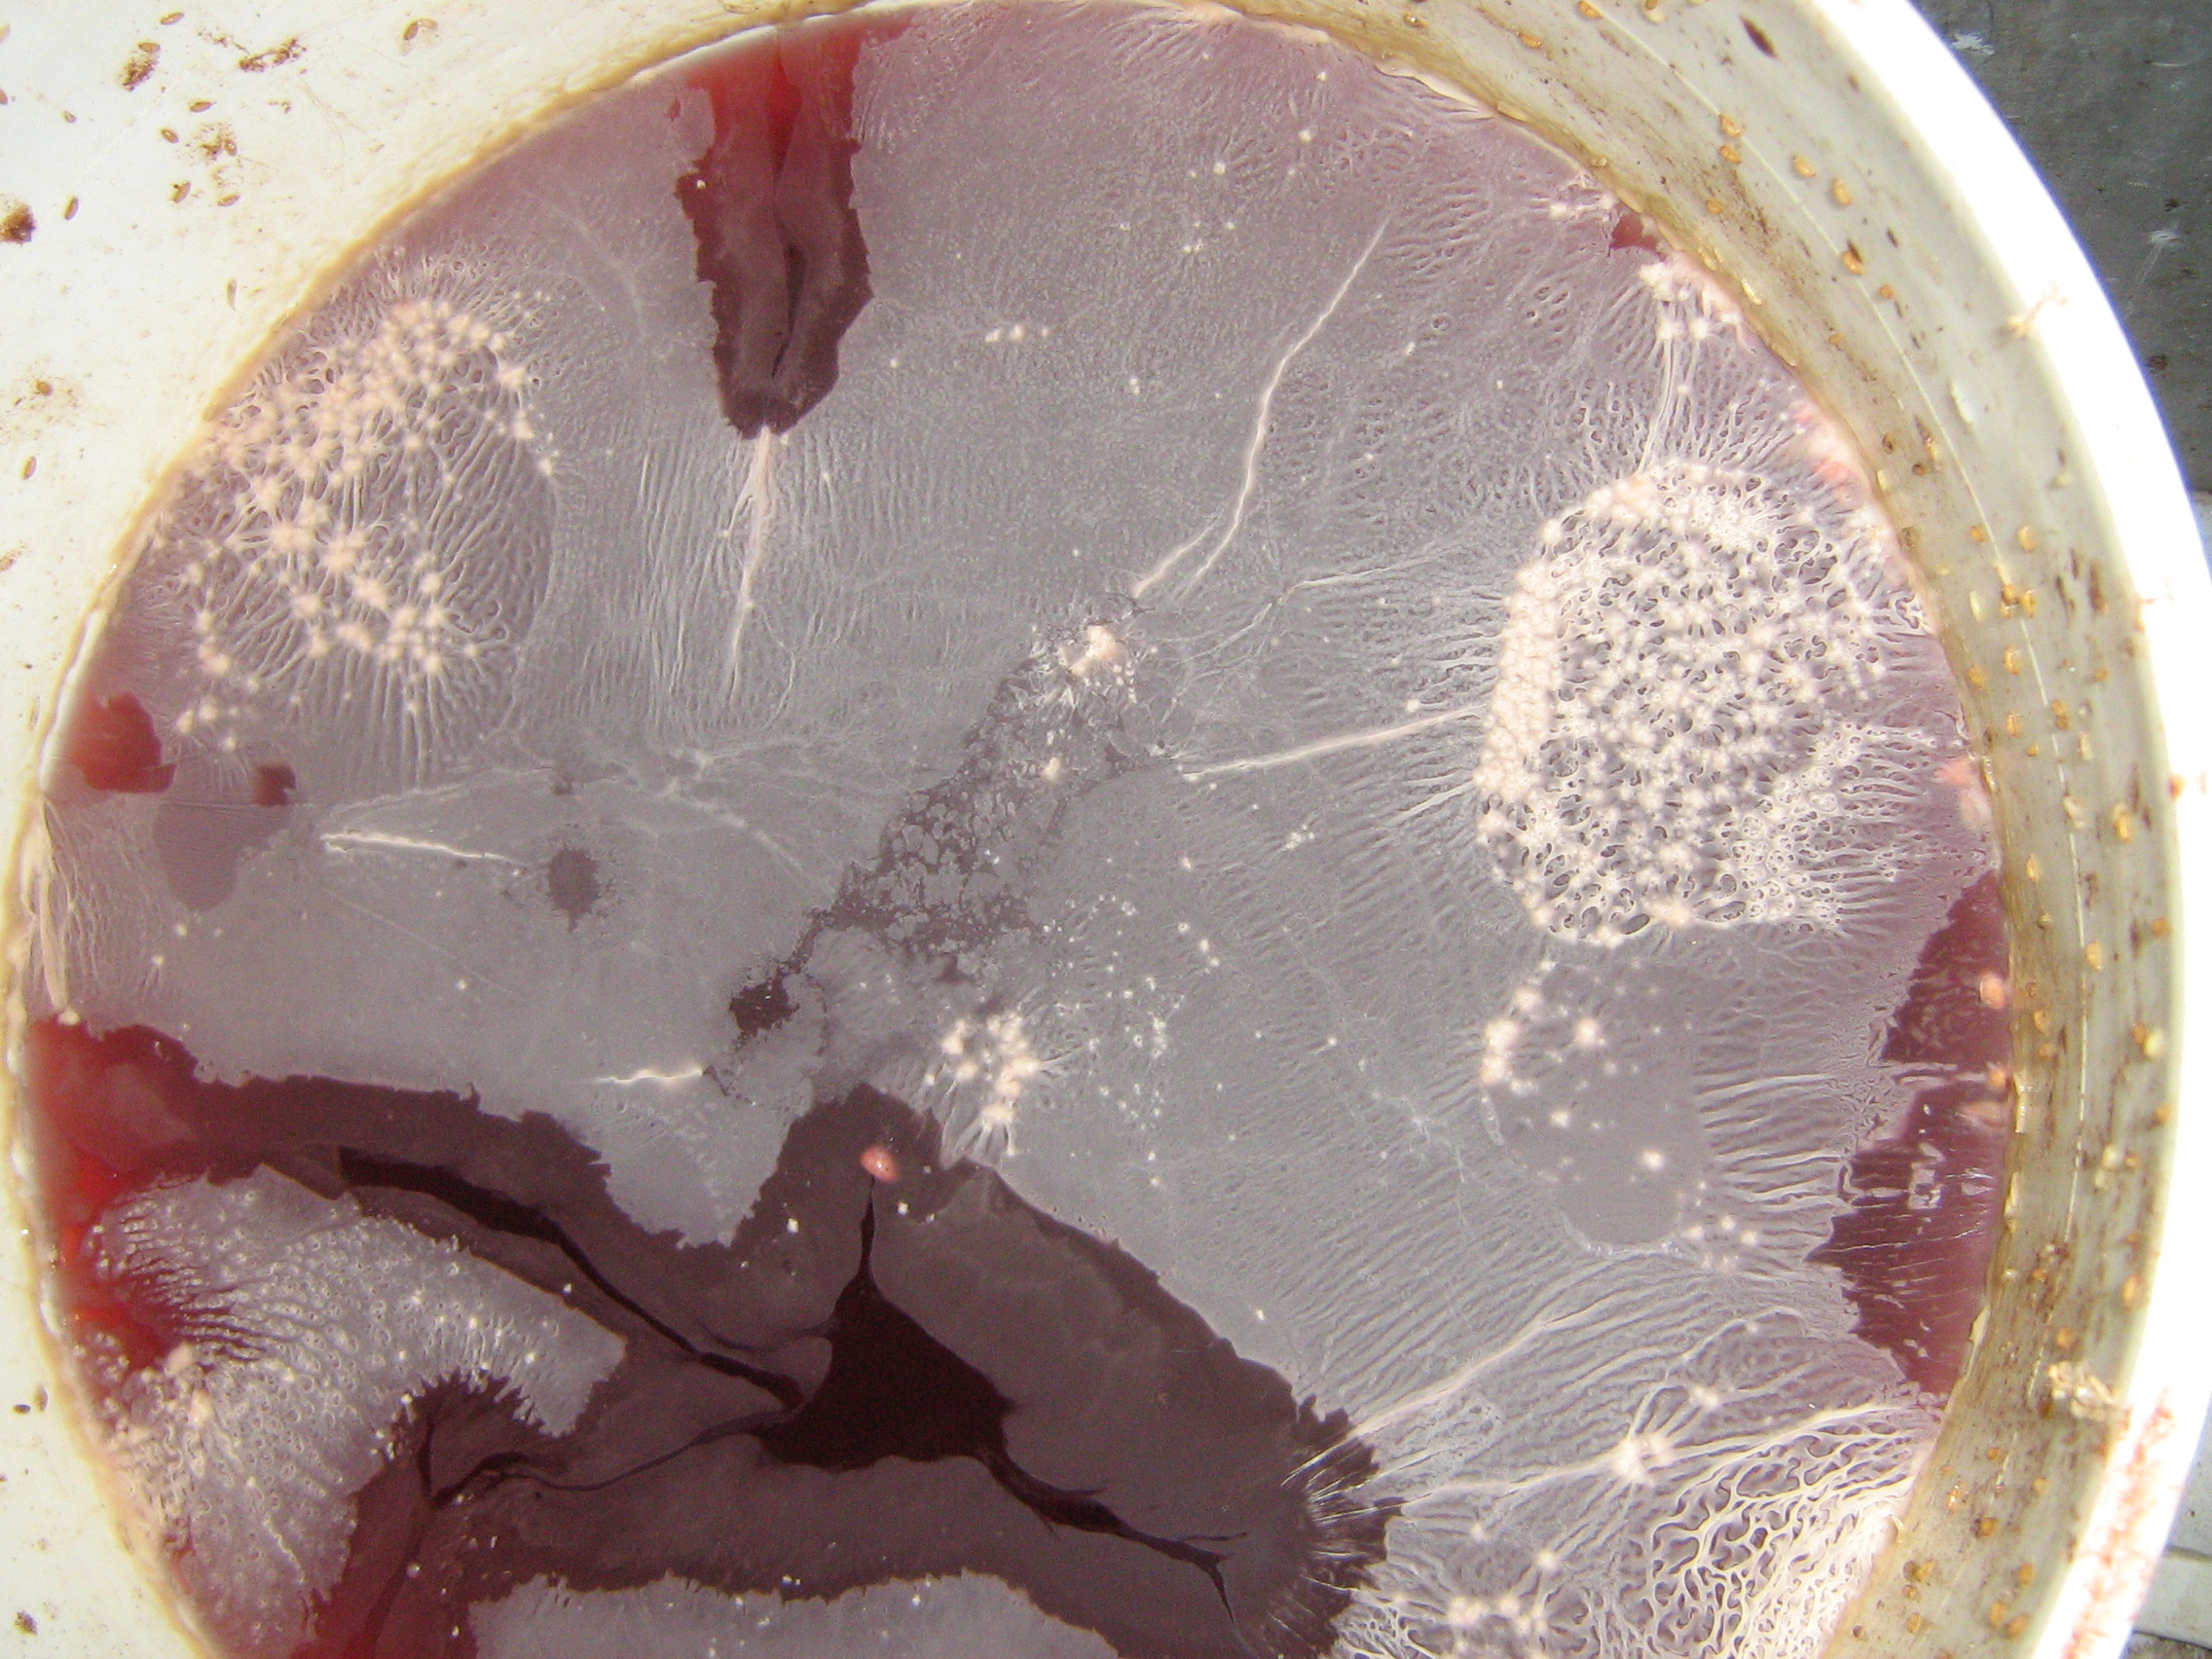 Red wine fermenting with a layer of surface yeast or mold